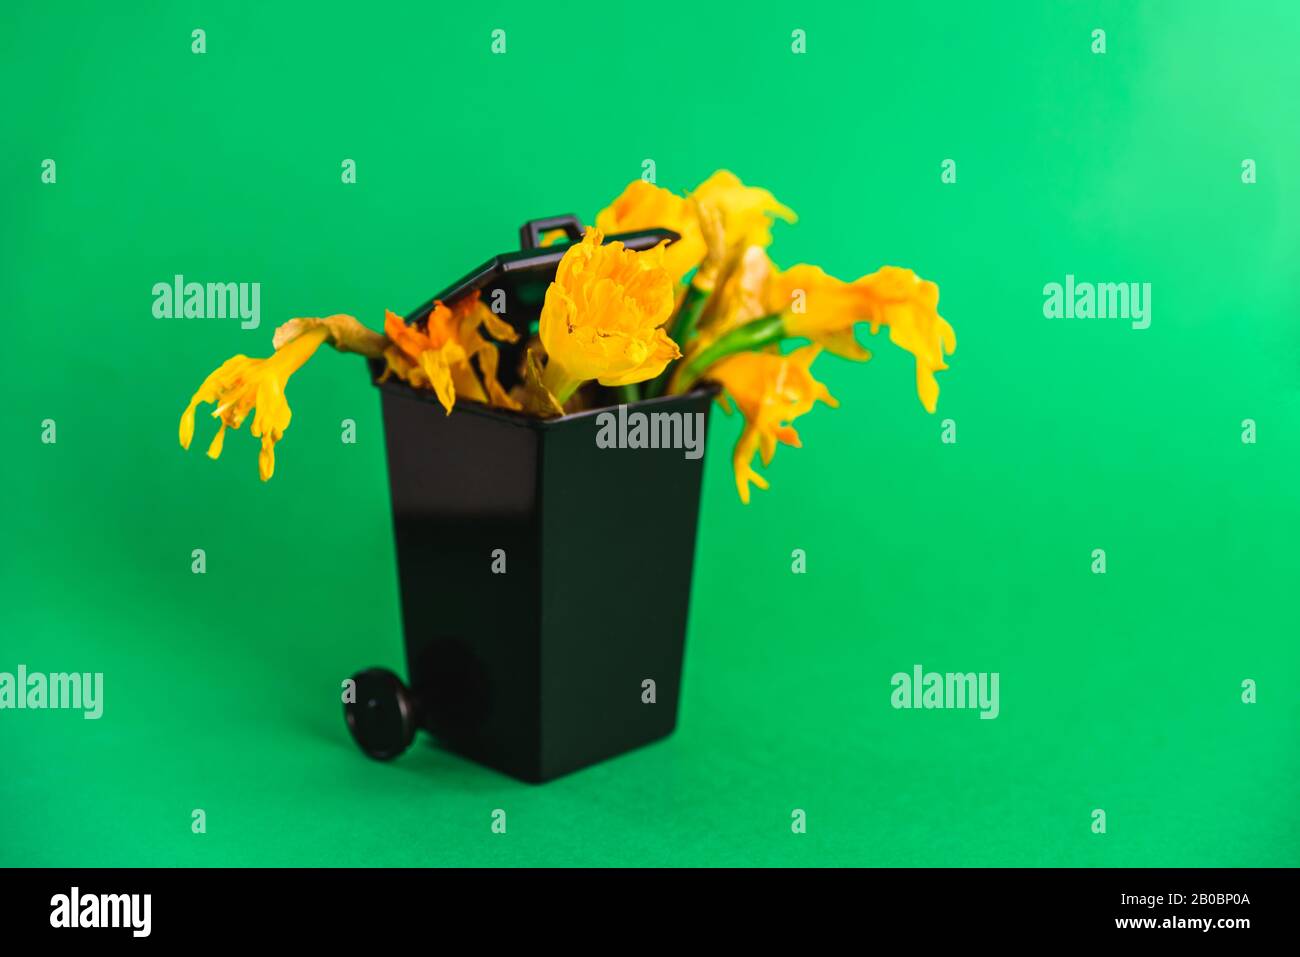 Black Dumpster with wilted narcissus flowers bouquet. Dead, aging concept. Disposable gift. Green background Stock Photo